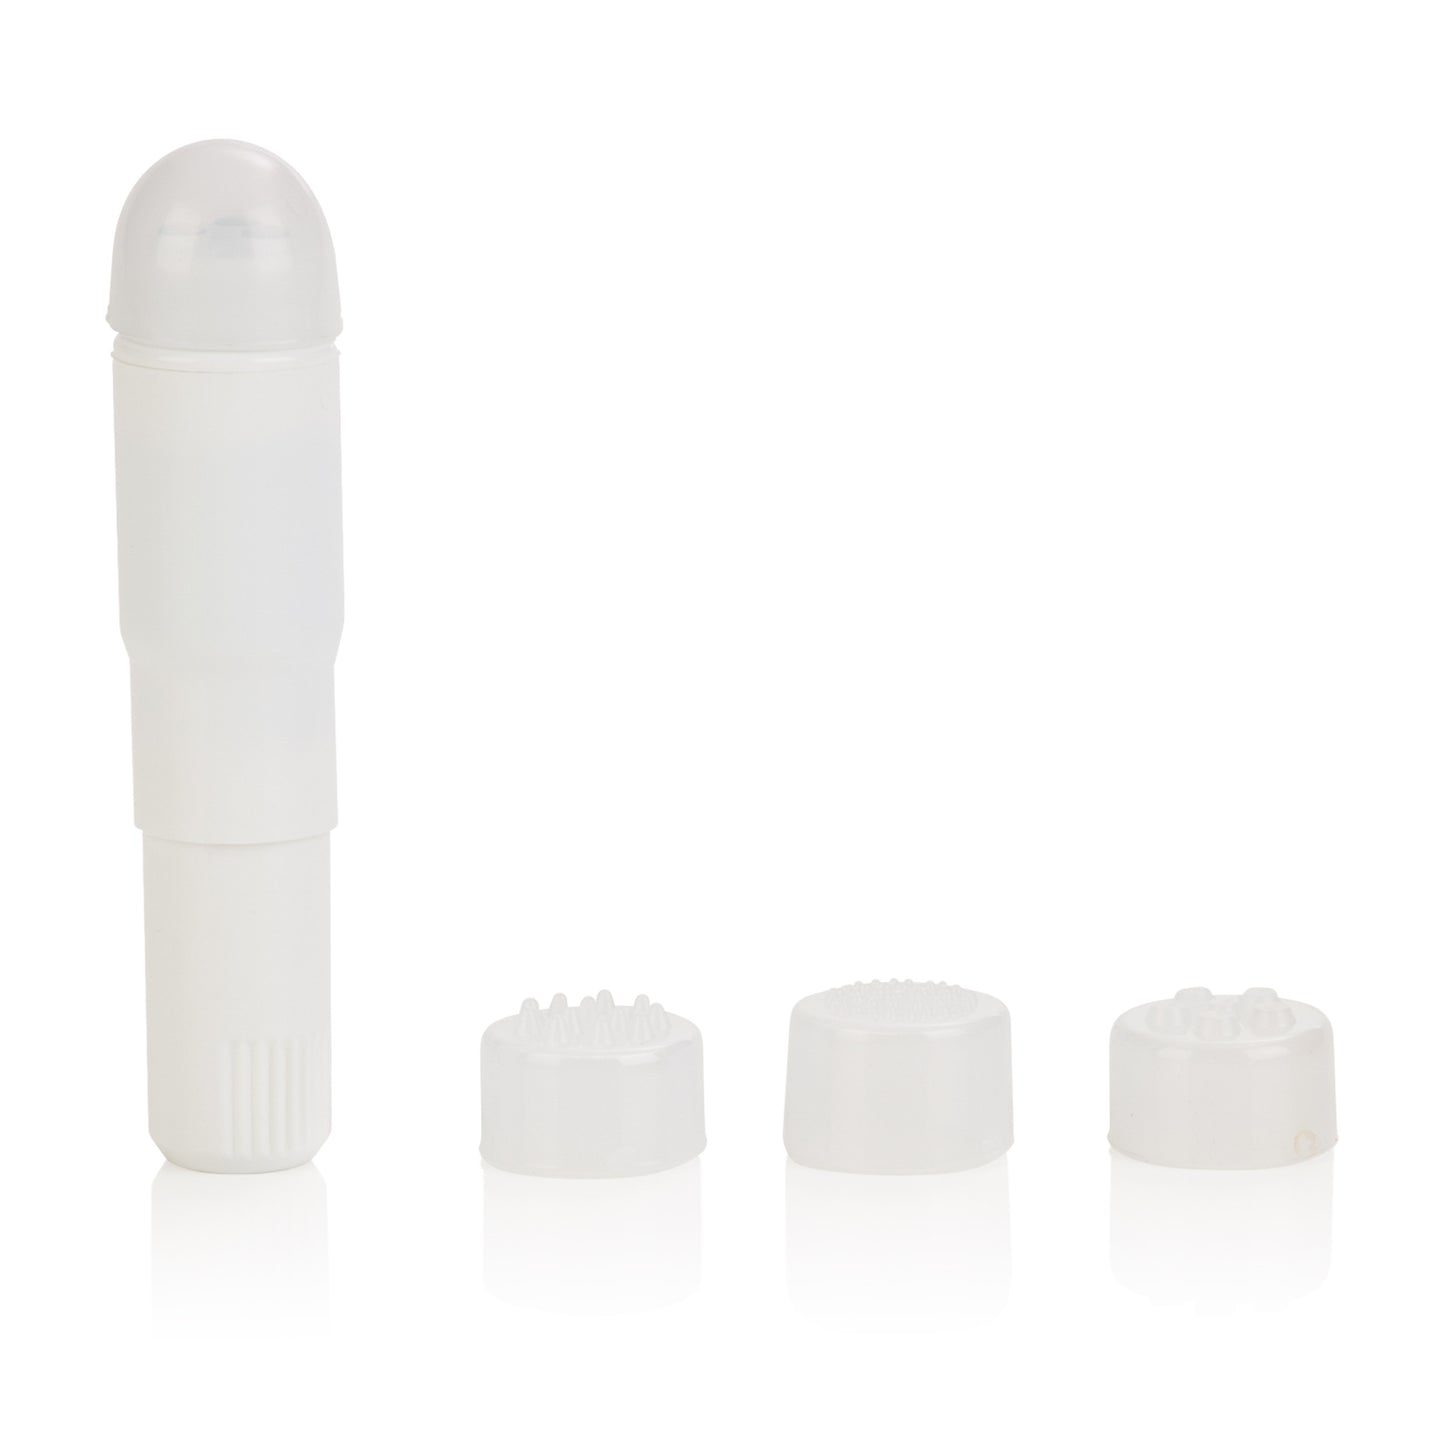 Compact Waterproof Personal Travel Massager With 4 Tips - White